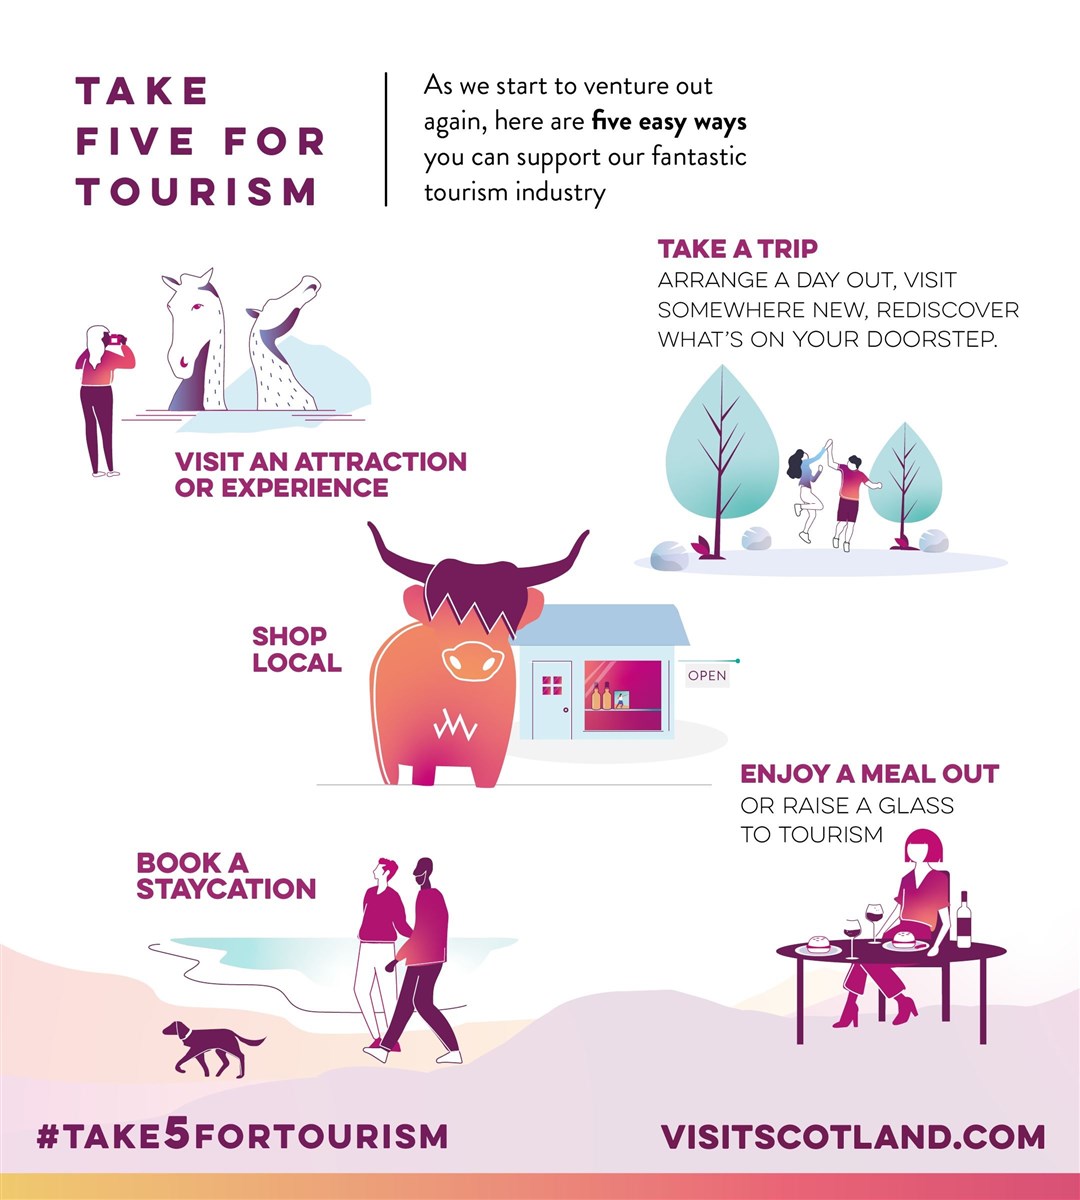 The campaign outlines steps people can take to help restart the tourism trade.